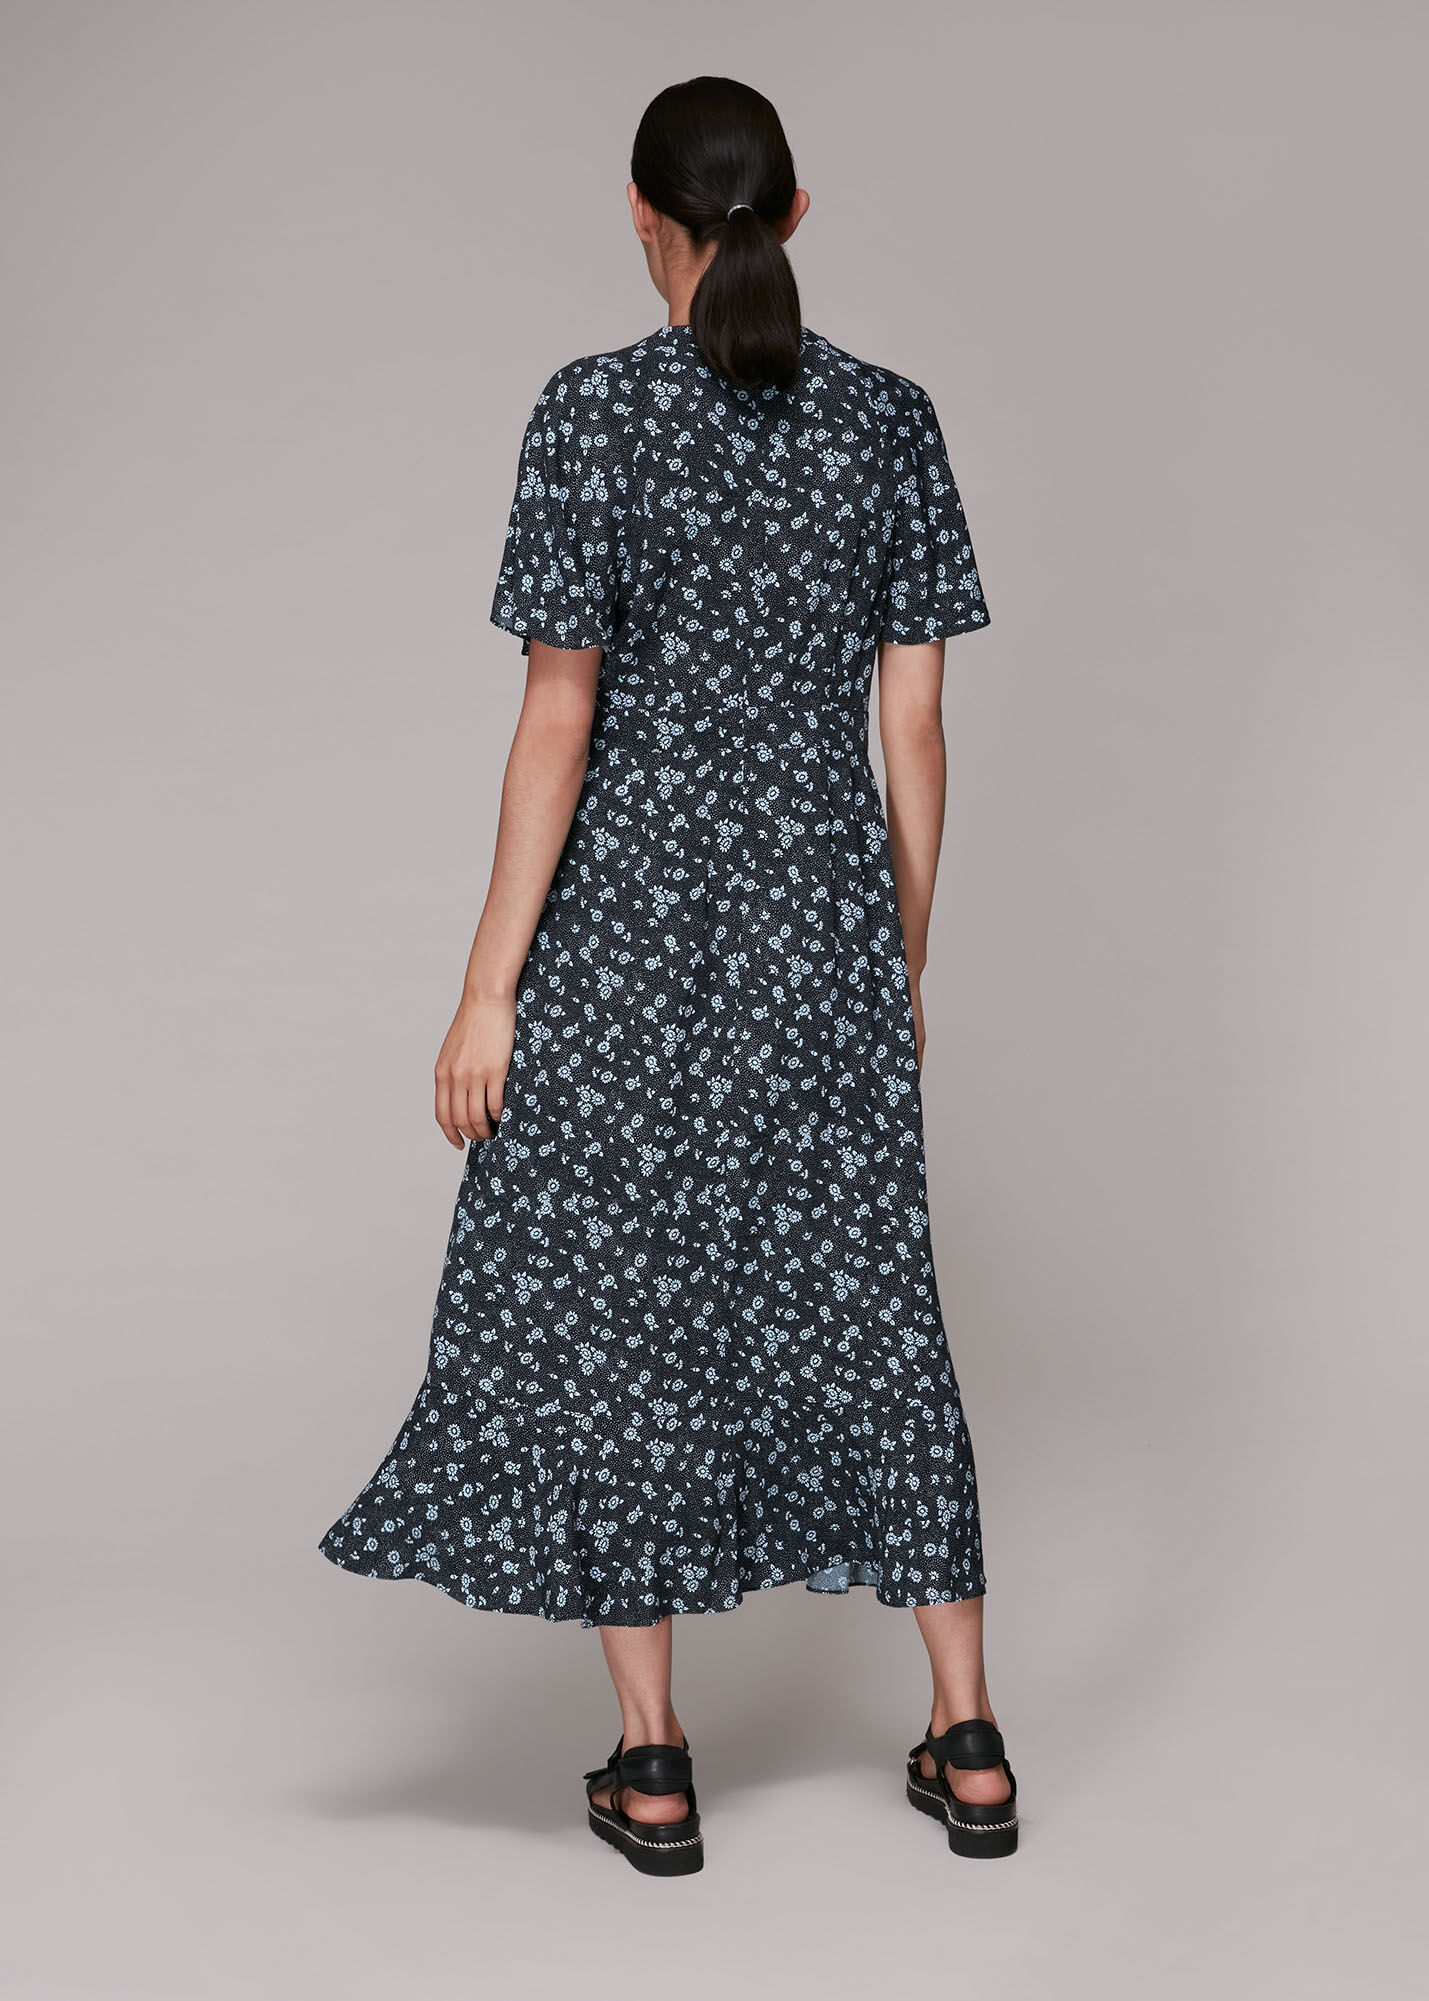 Whistles Daisy Spot Print Midi Dress in Blue Womens Clothing Dresses Casual and day dresses 